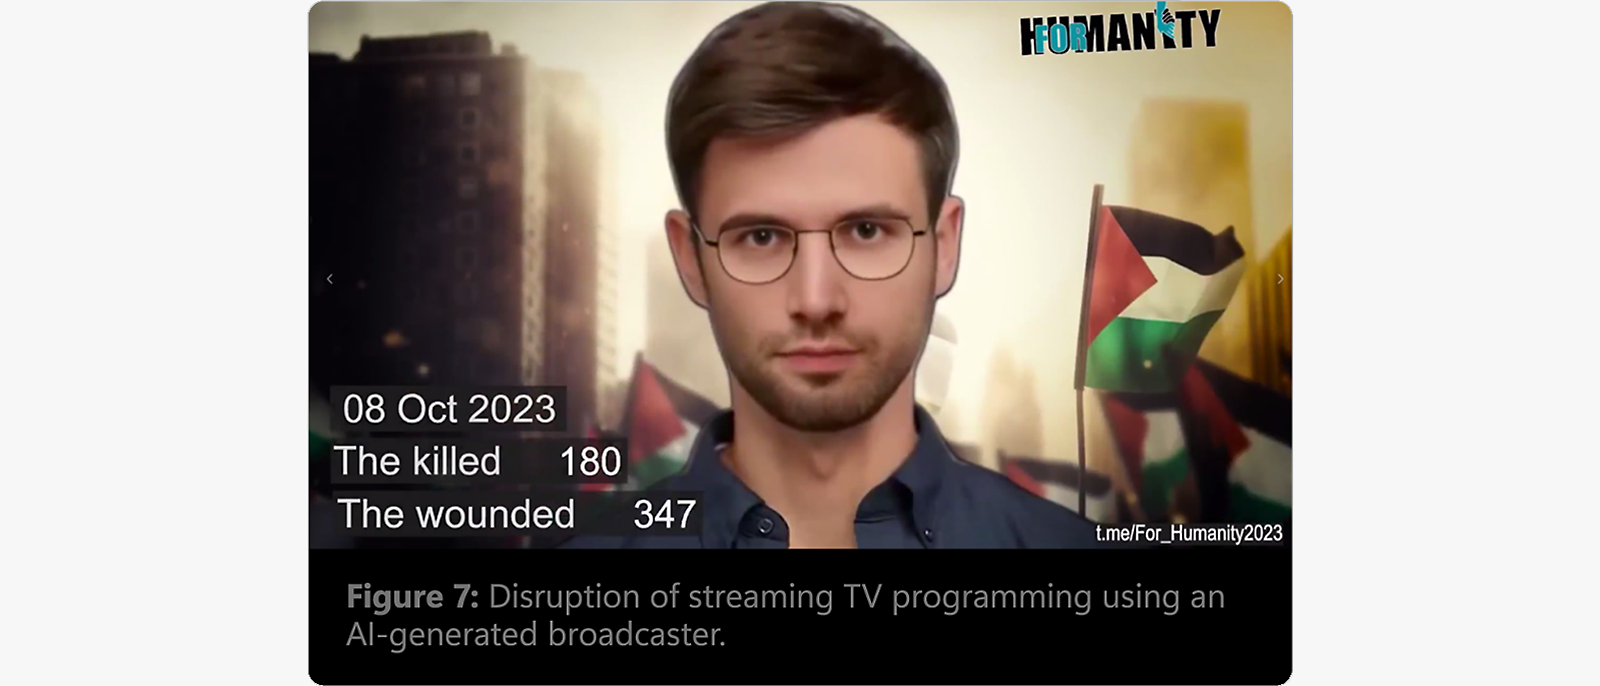 HUMANITY 2023: Oct 8, 180 killed, 347 wounded. Figure 7: Disruption of streaming TV using AI-generated broadcaster